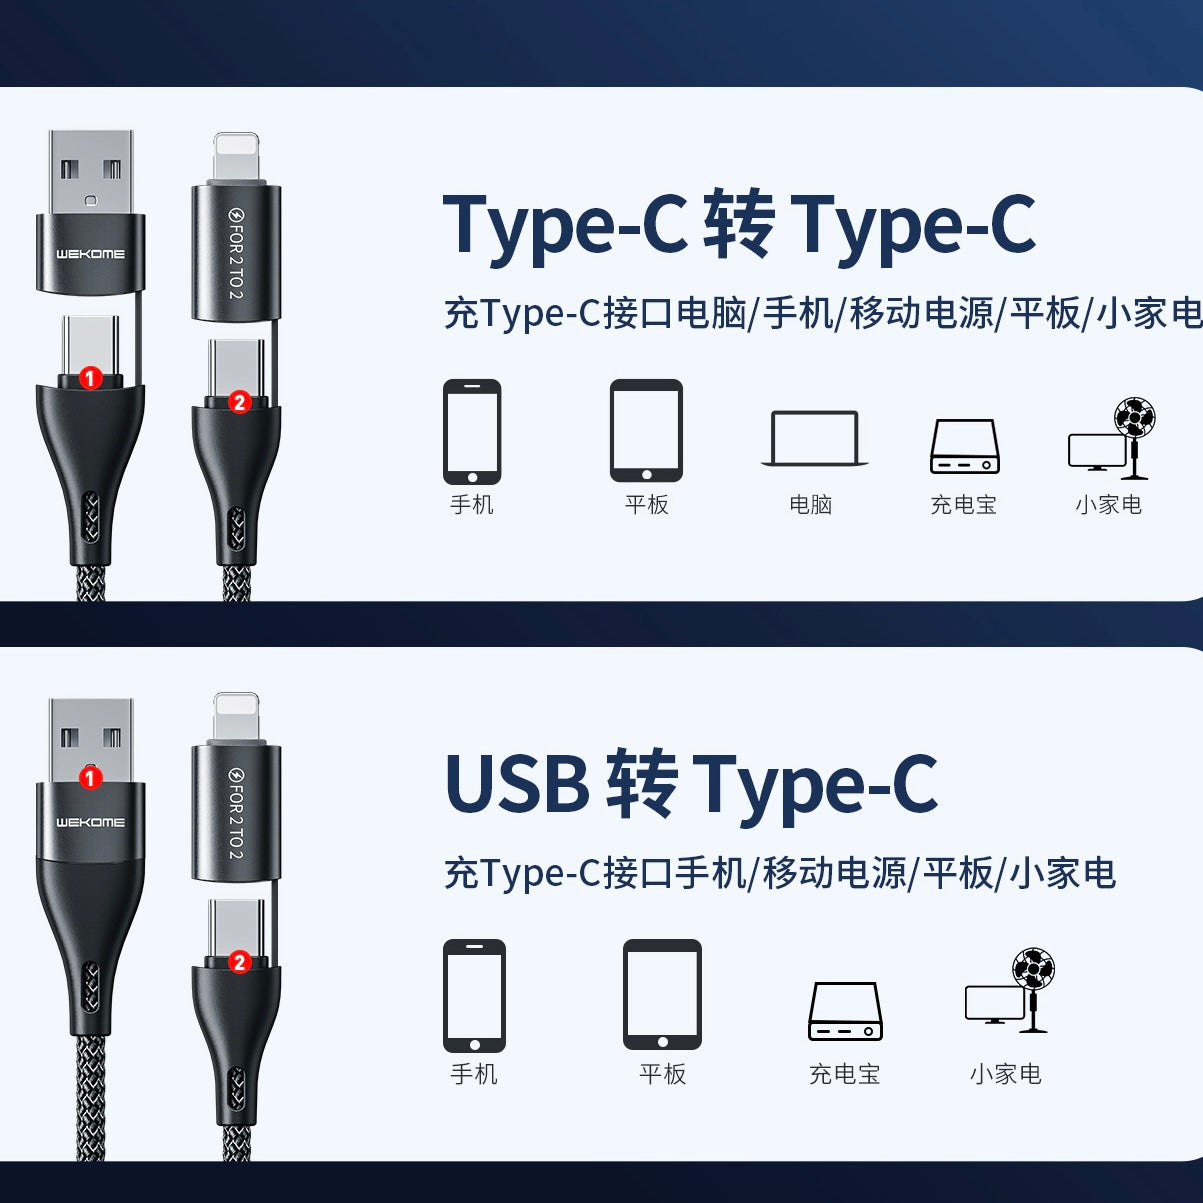 WDC-112 Execution standard 4in1 Date Cable